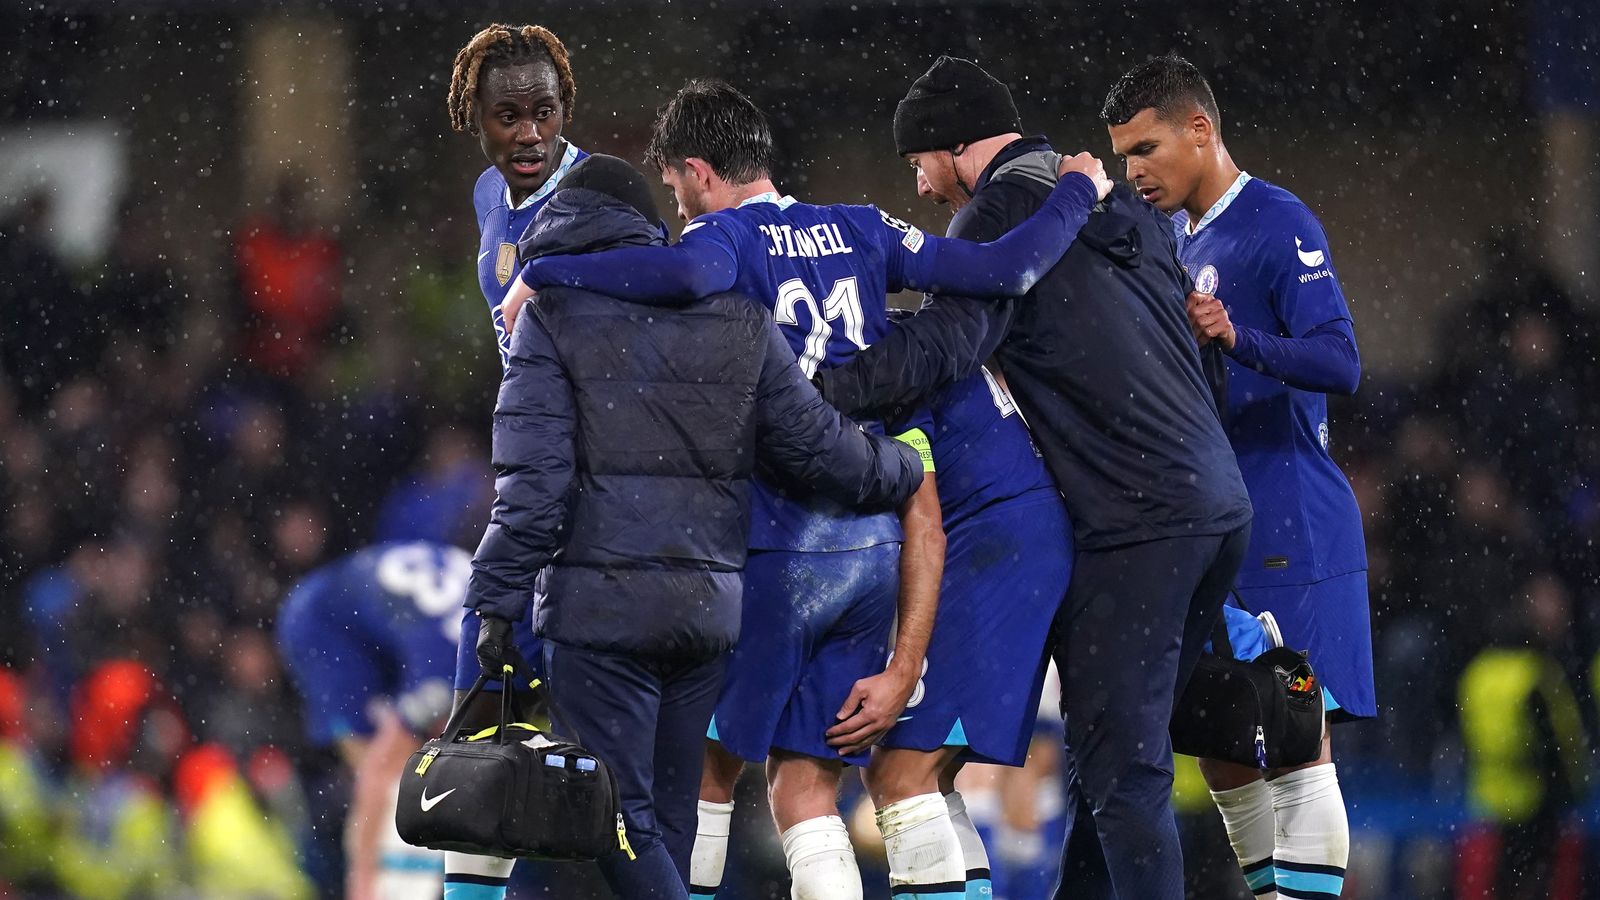 Chelsea defender Ben Chilwell is helped off the pitch after suffering a hamstring injury in Chelsea's Champions League win over Dinamo Zagreb.